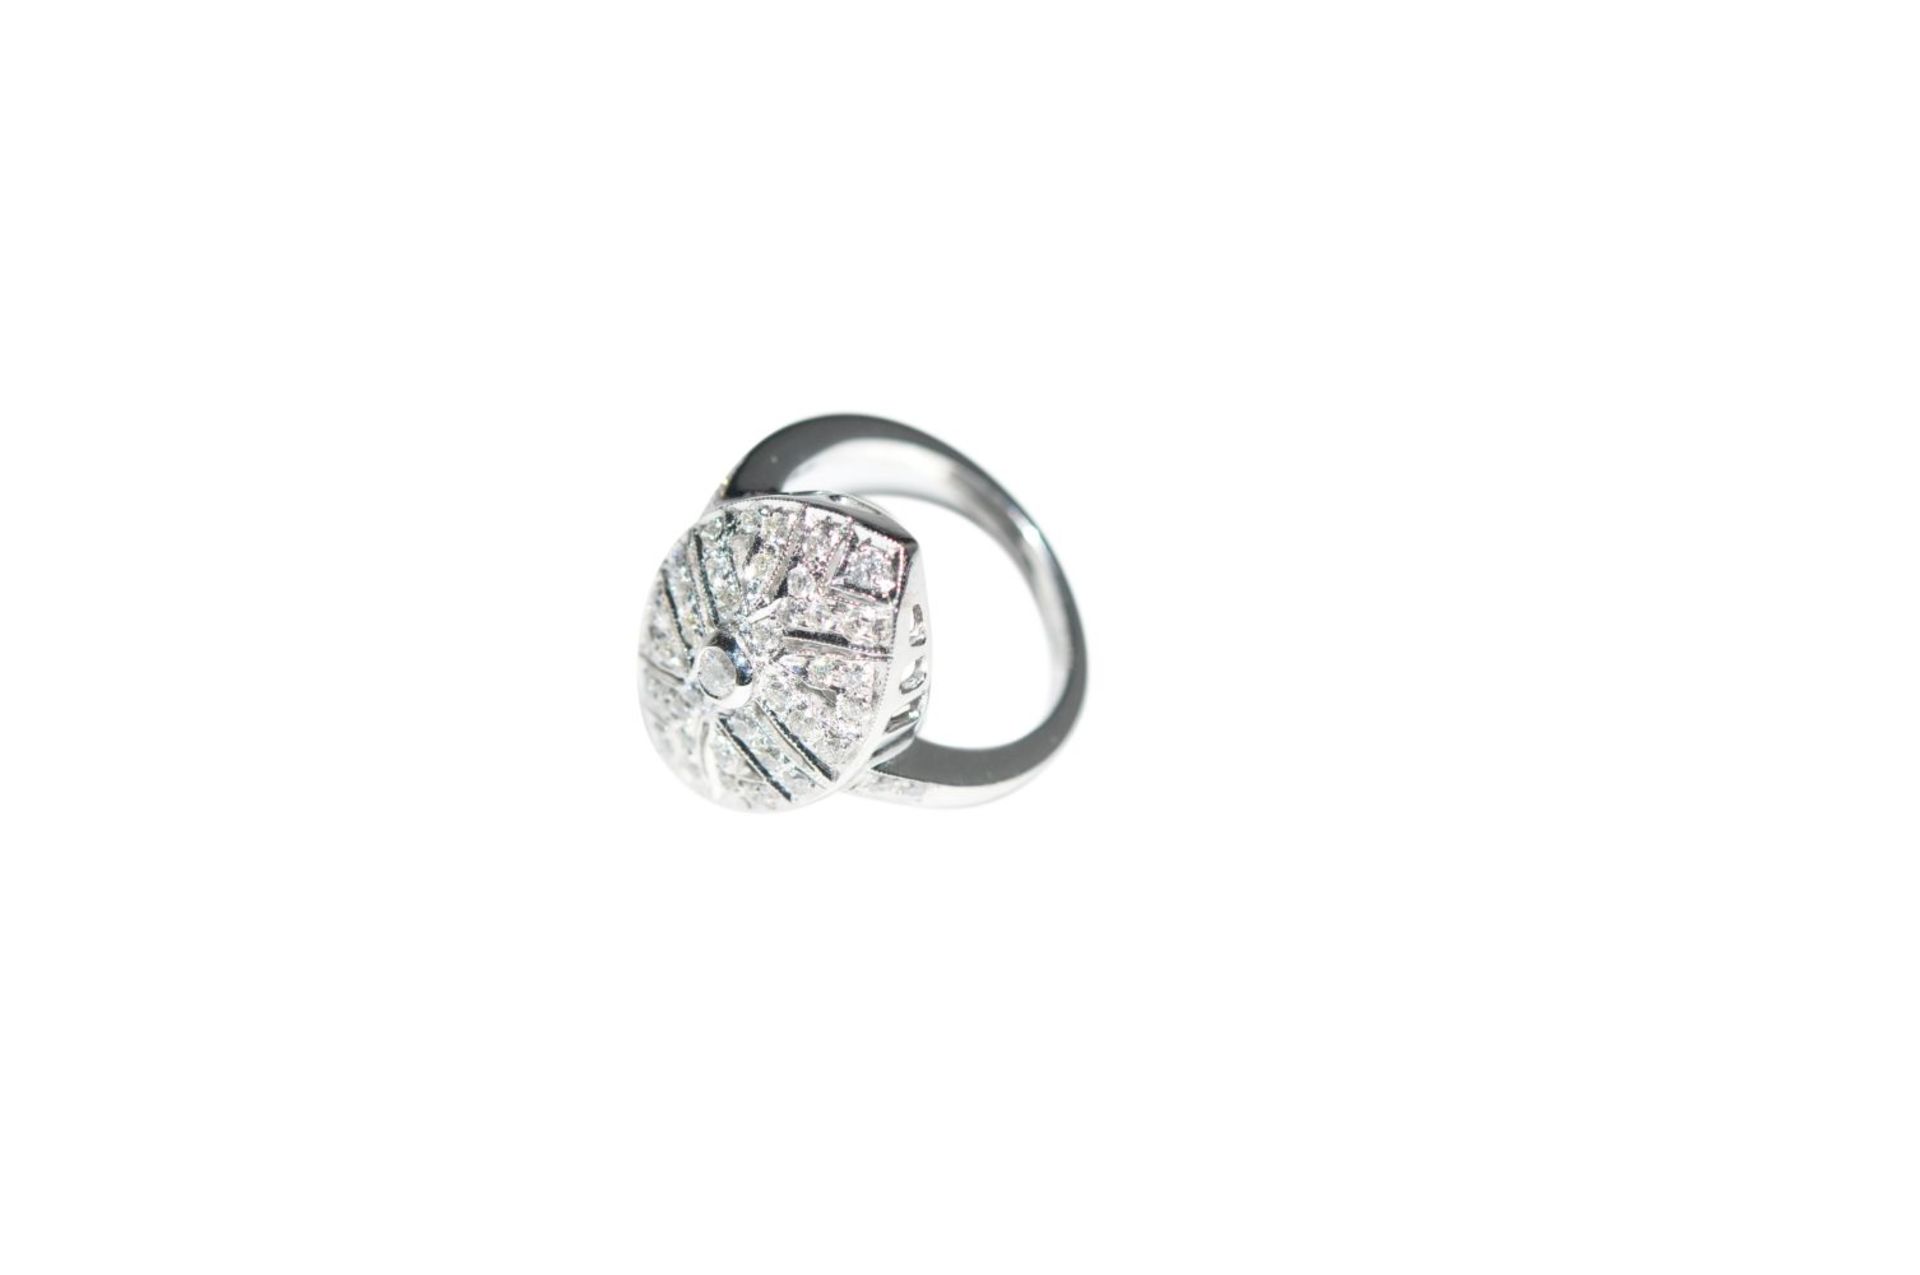 Diamond ring18Kt white gold ring with diamonds total carat weight approx. 0.83ct, total weight 7.4g, - Bild 3 aus 3